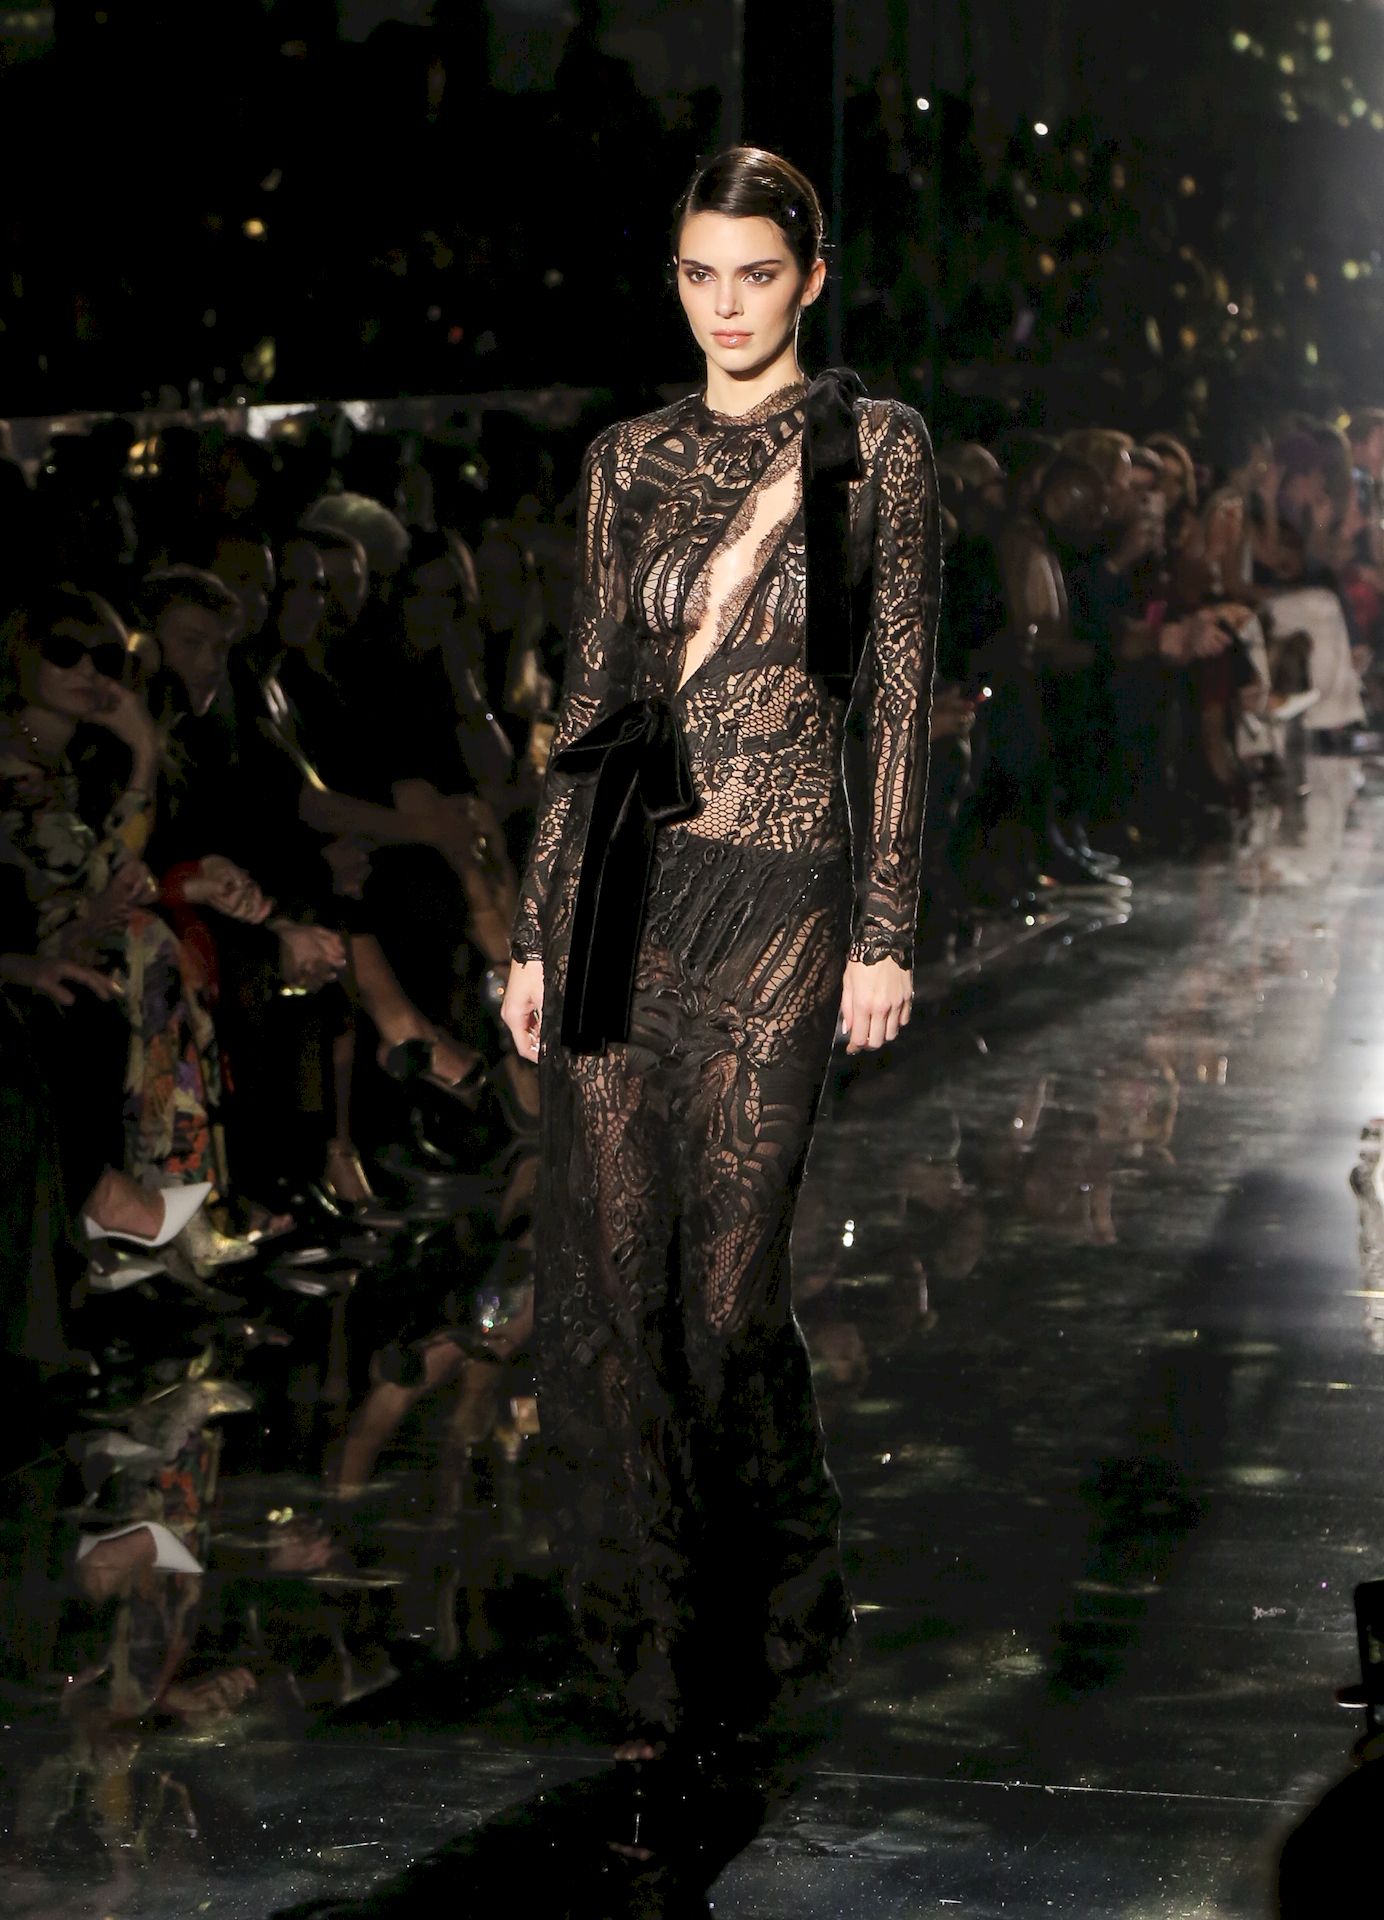 Kendall-Jenner-Walks-the-Runway-During-the-Tom-Ford-Show-0001.jpg